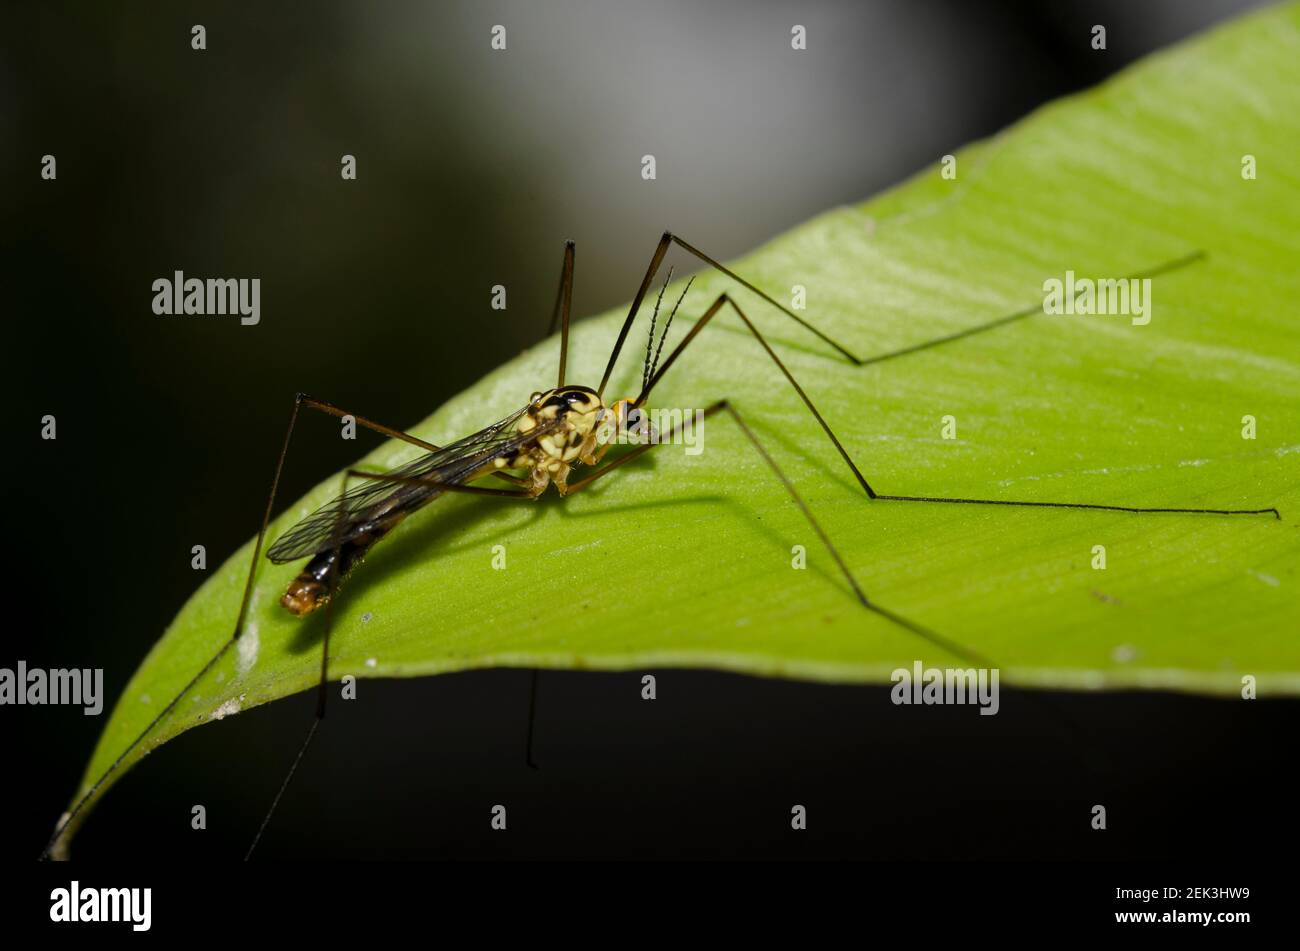 Crane Fly, Tipulidae Family, on leaf, Klungkung, Bali, Indonesia Stock Photo